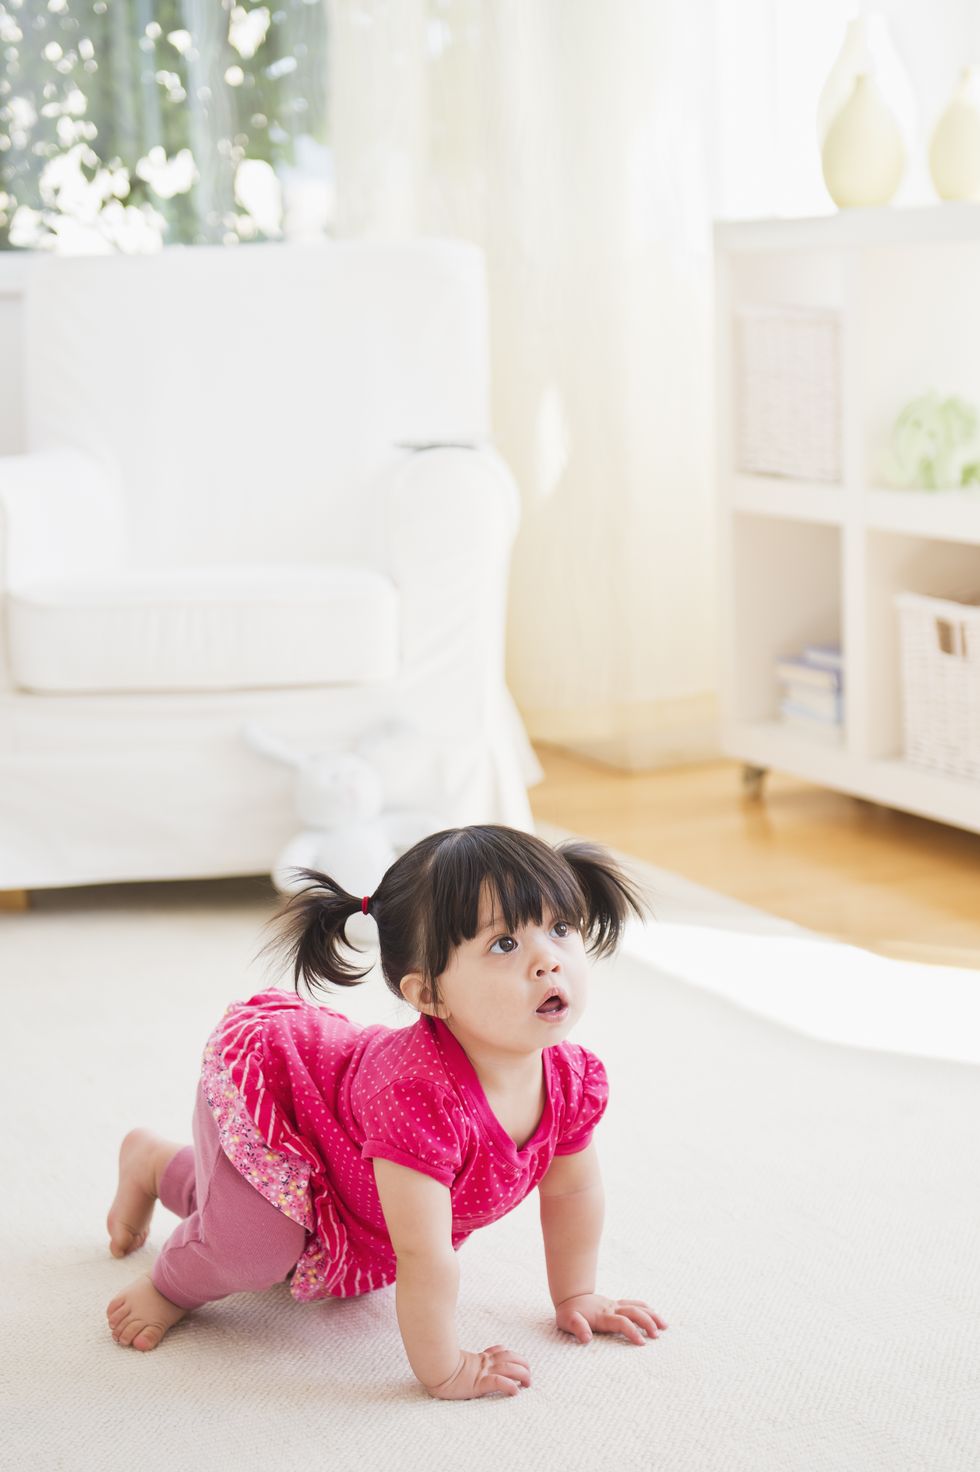 Baby Proofing Fireplace: Keep Your Toddlers Safe With Our 9 Tips